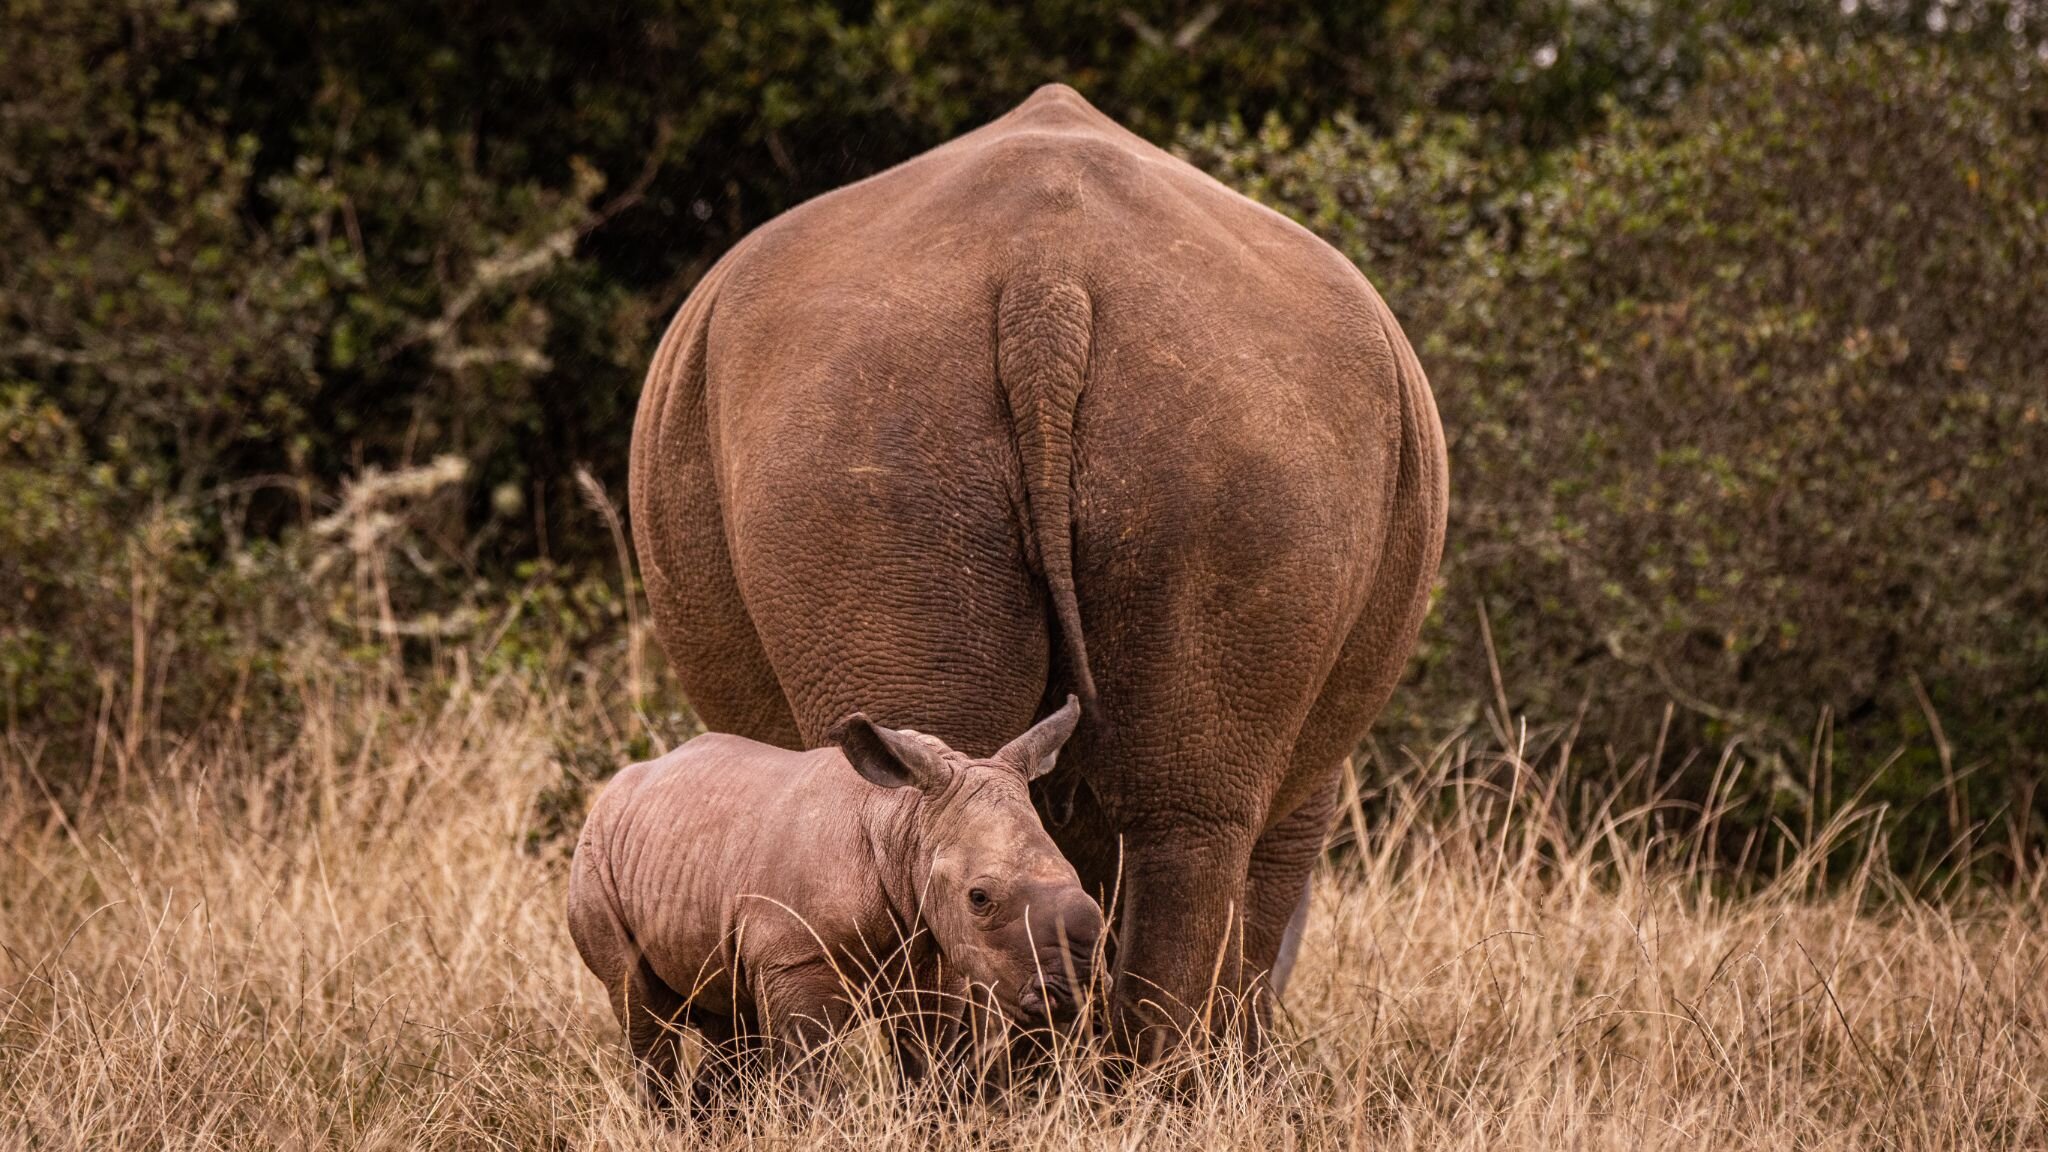 WYLD Mother and Child of the Week: A Long Way to Grow

It takes 6 to 7 years for a white Rhino cow to reach maturity and 10 to 12 years for Rhino bulls. On average they live to about 40 years old. Mature Rhinos consume about 150 pounds of plant matte